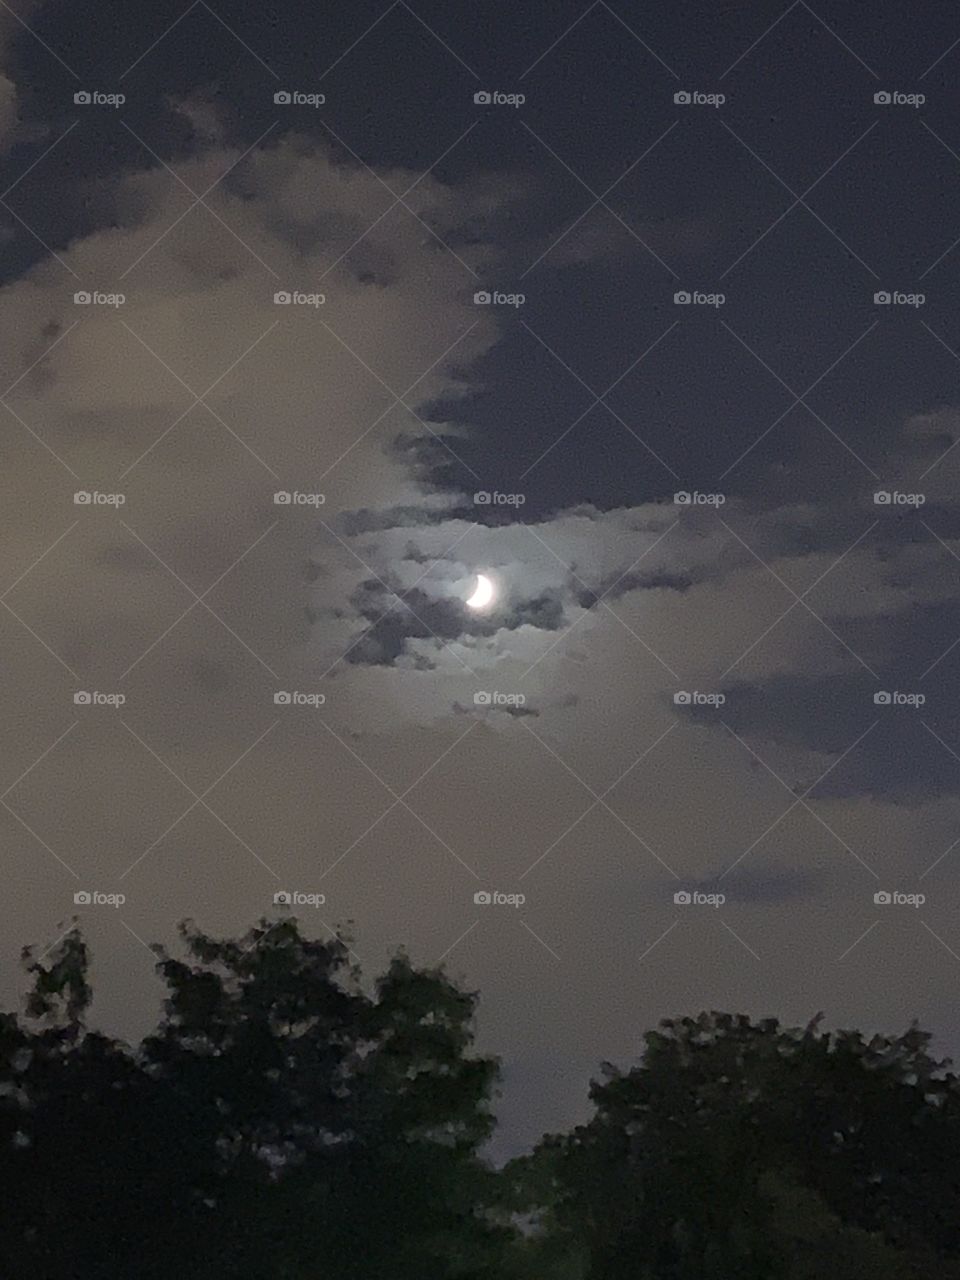 Cloudy night moonscape 